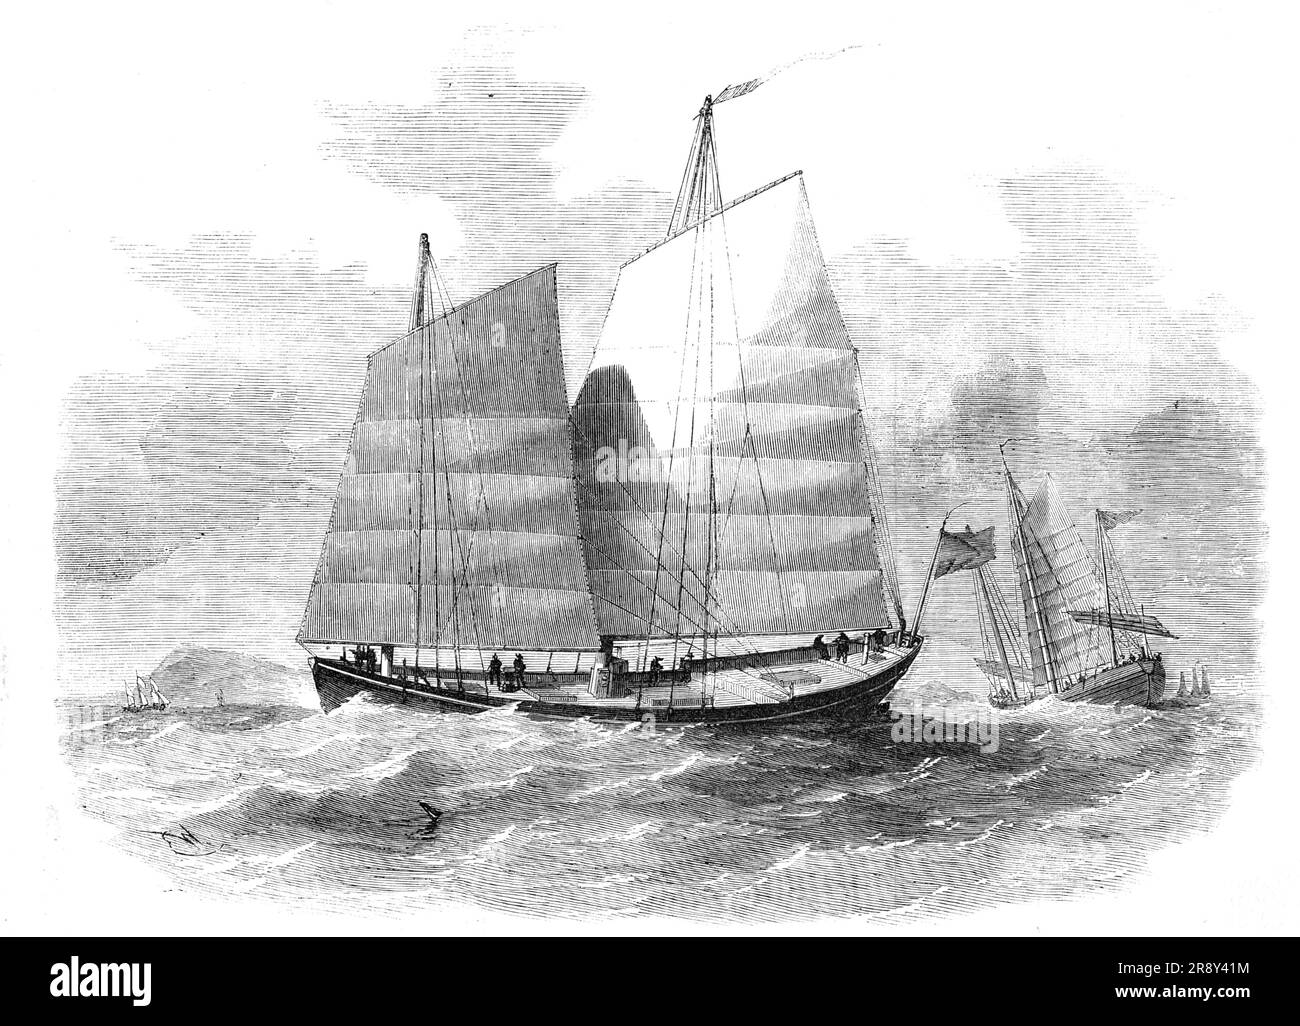 Chinese Merchants' Lorchas, Canton River, 1857. Second Opium War. 'The lorcha is used in the coasting trade of China by the English and Portuguese...[These vessels have] led to so much dispute in the debates in Parliament upon the war with China'. From &quot;Illustrated London News&quot;, 1857. Stock Photo